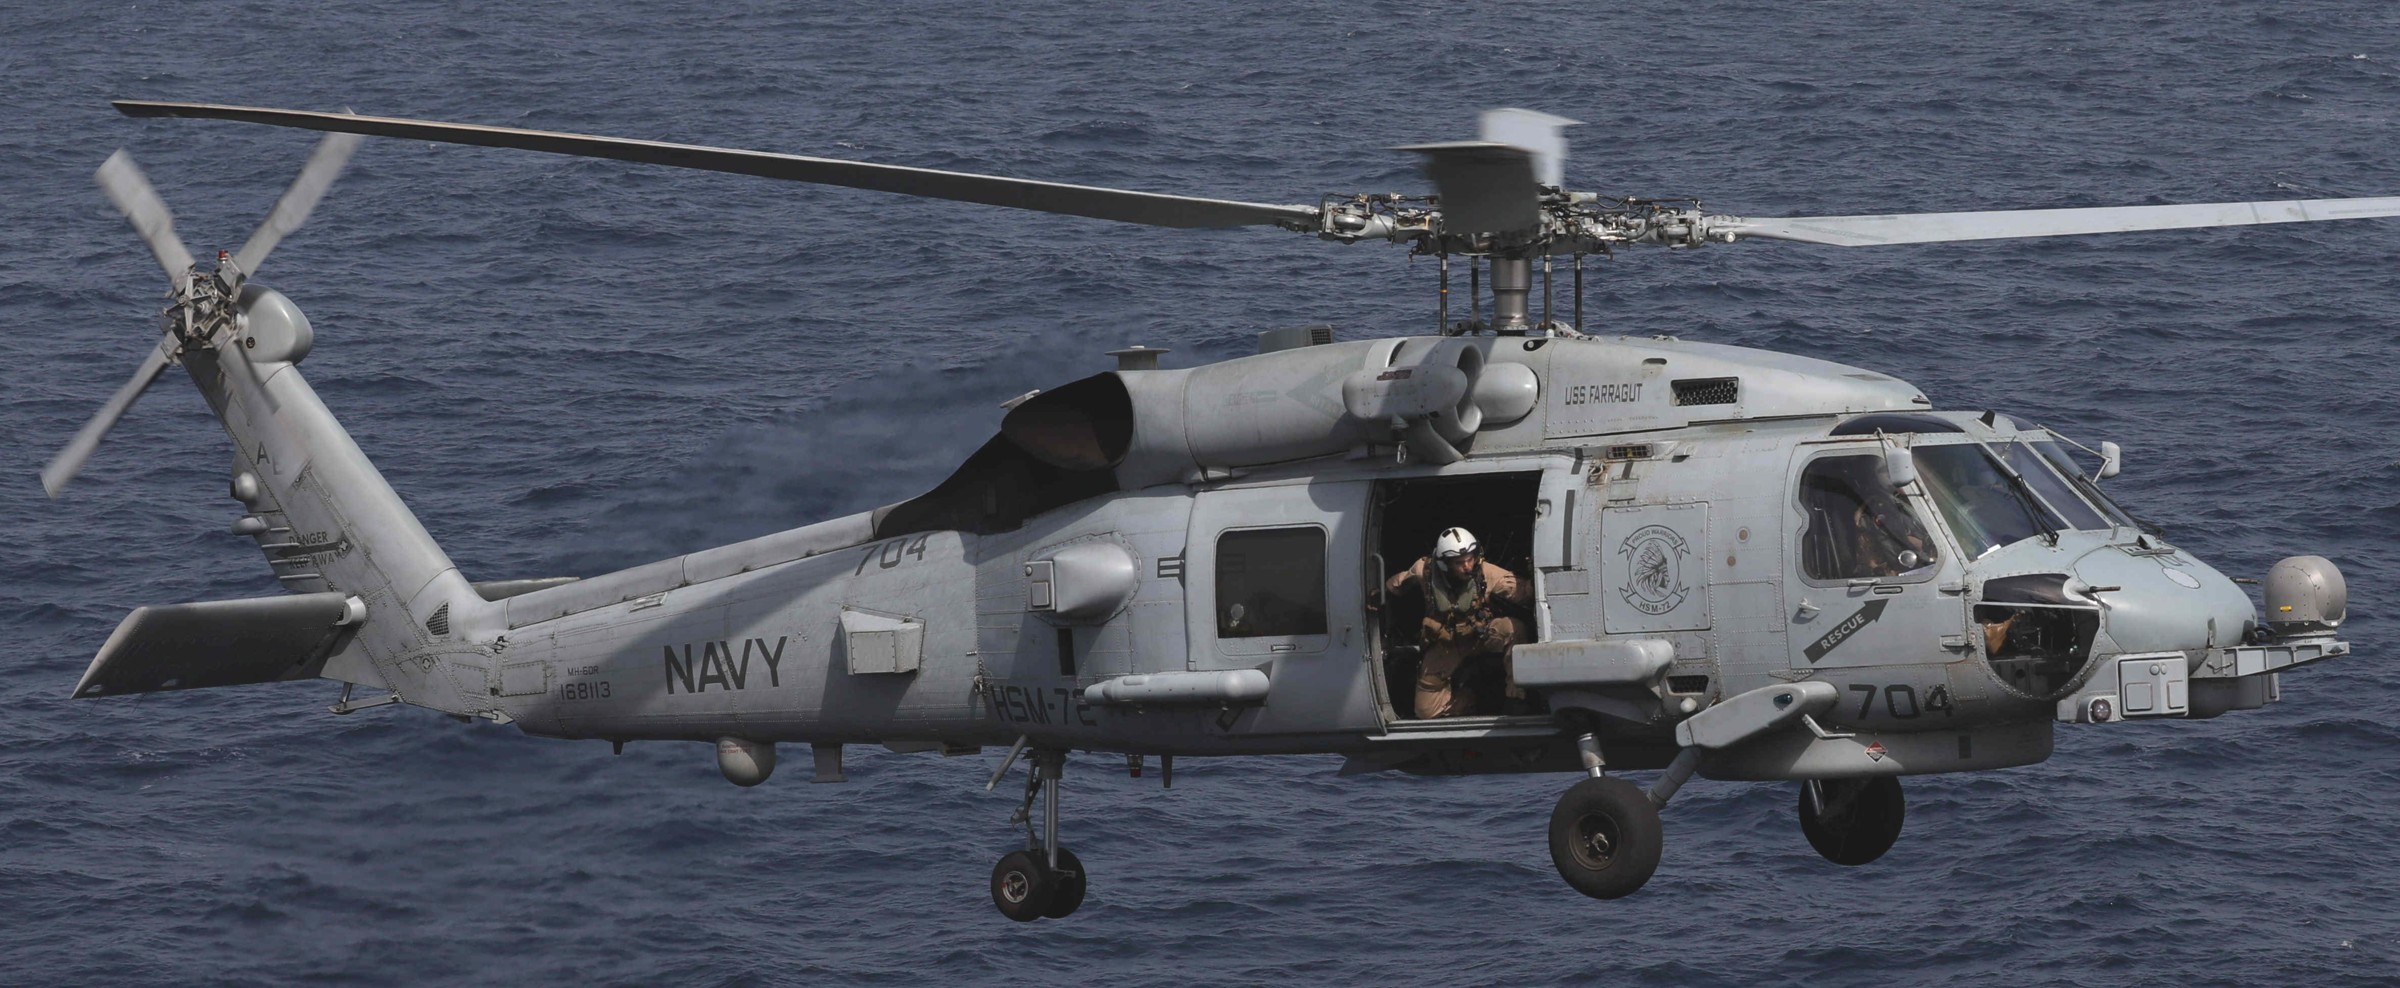 hsm-72 proud warriors helicopter maritime strike squadron mh-60r seahawk carrier air wing cvw-1 uss farragut ddg-99 2020